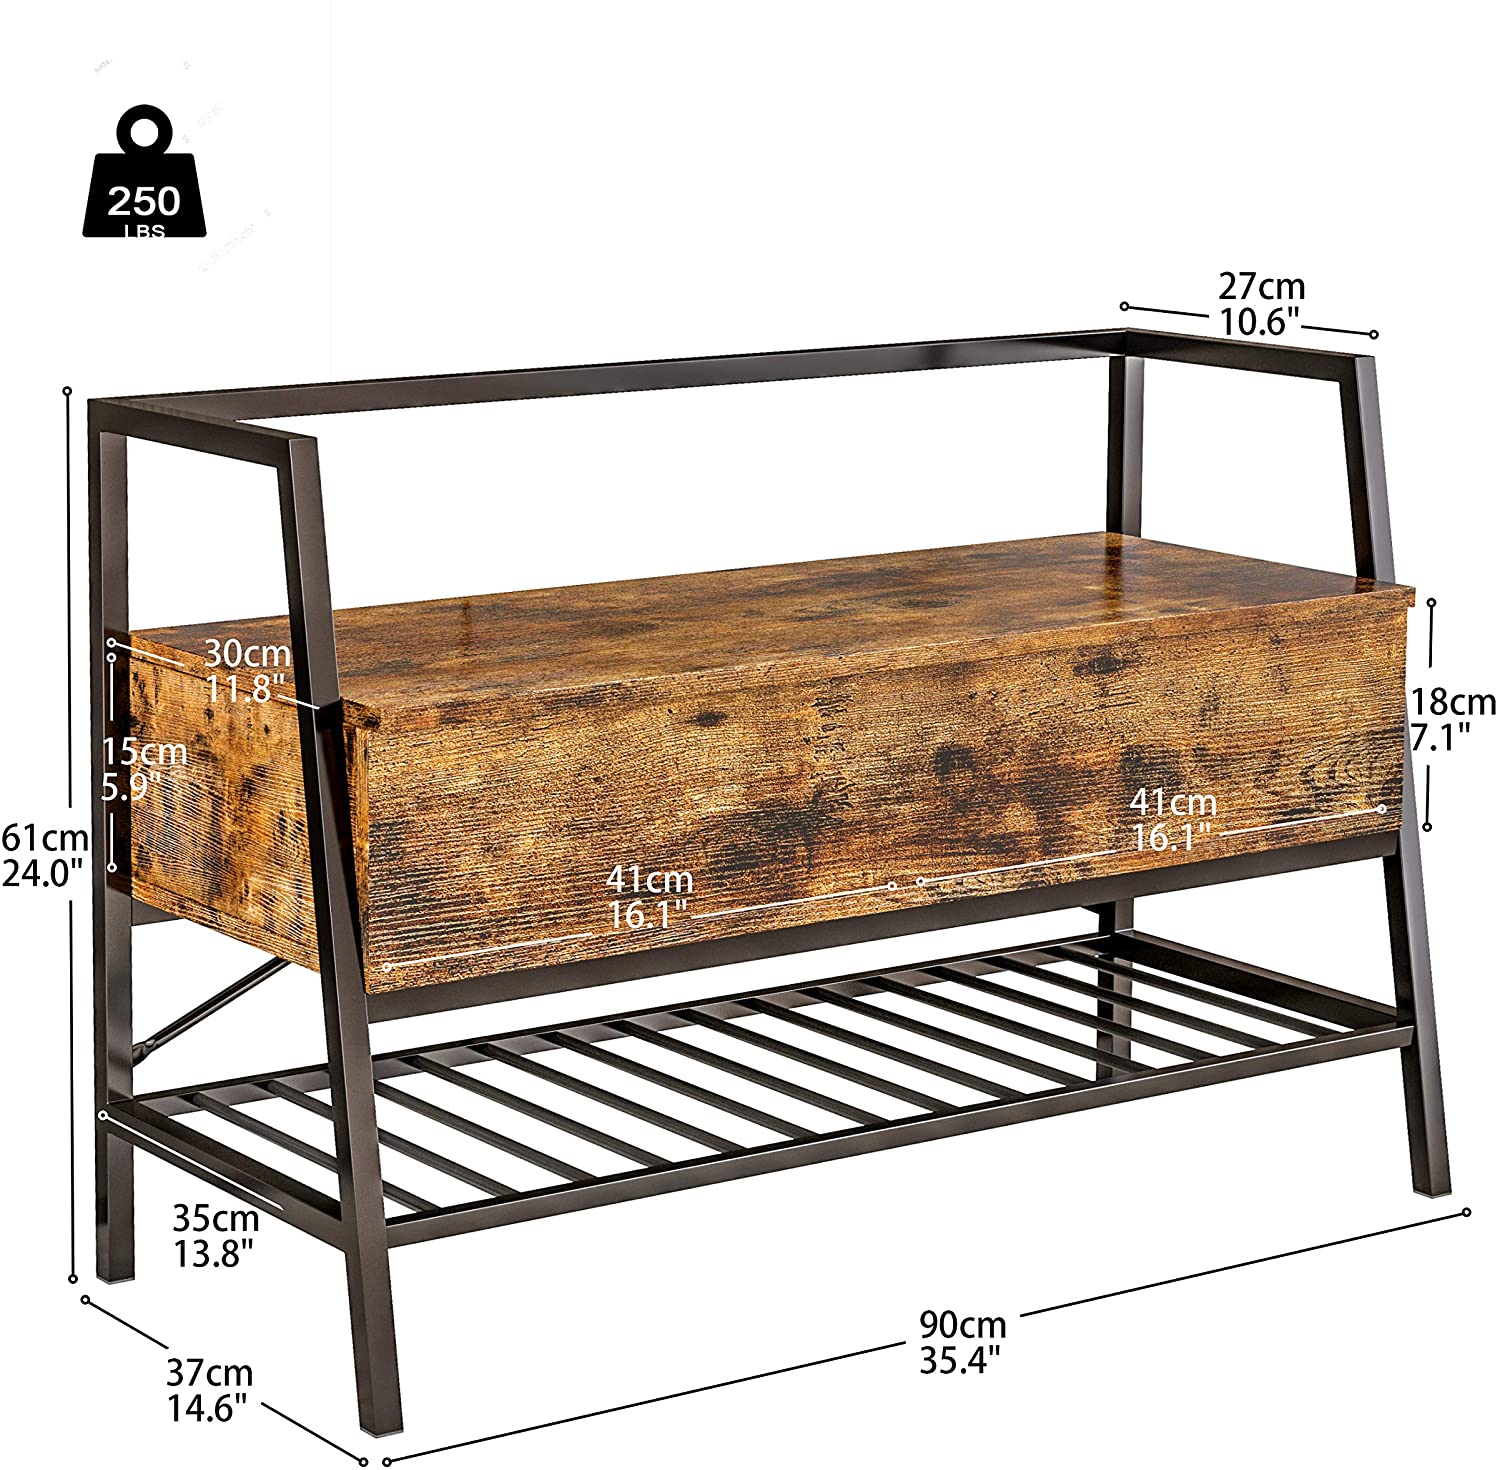 Benches : Shoe Rack Bench with Storage Box